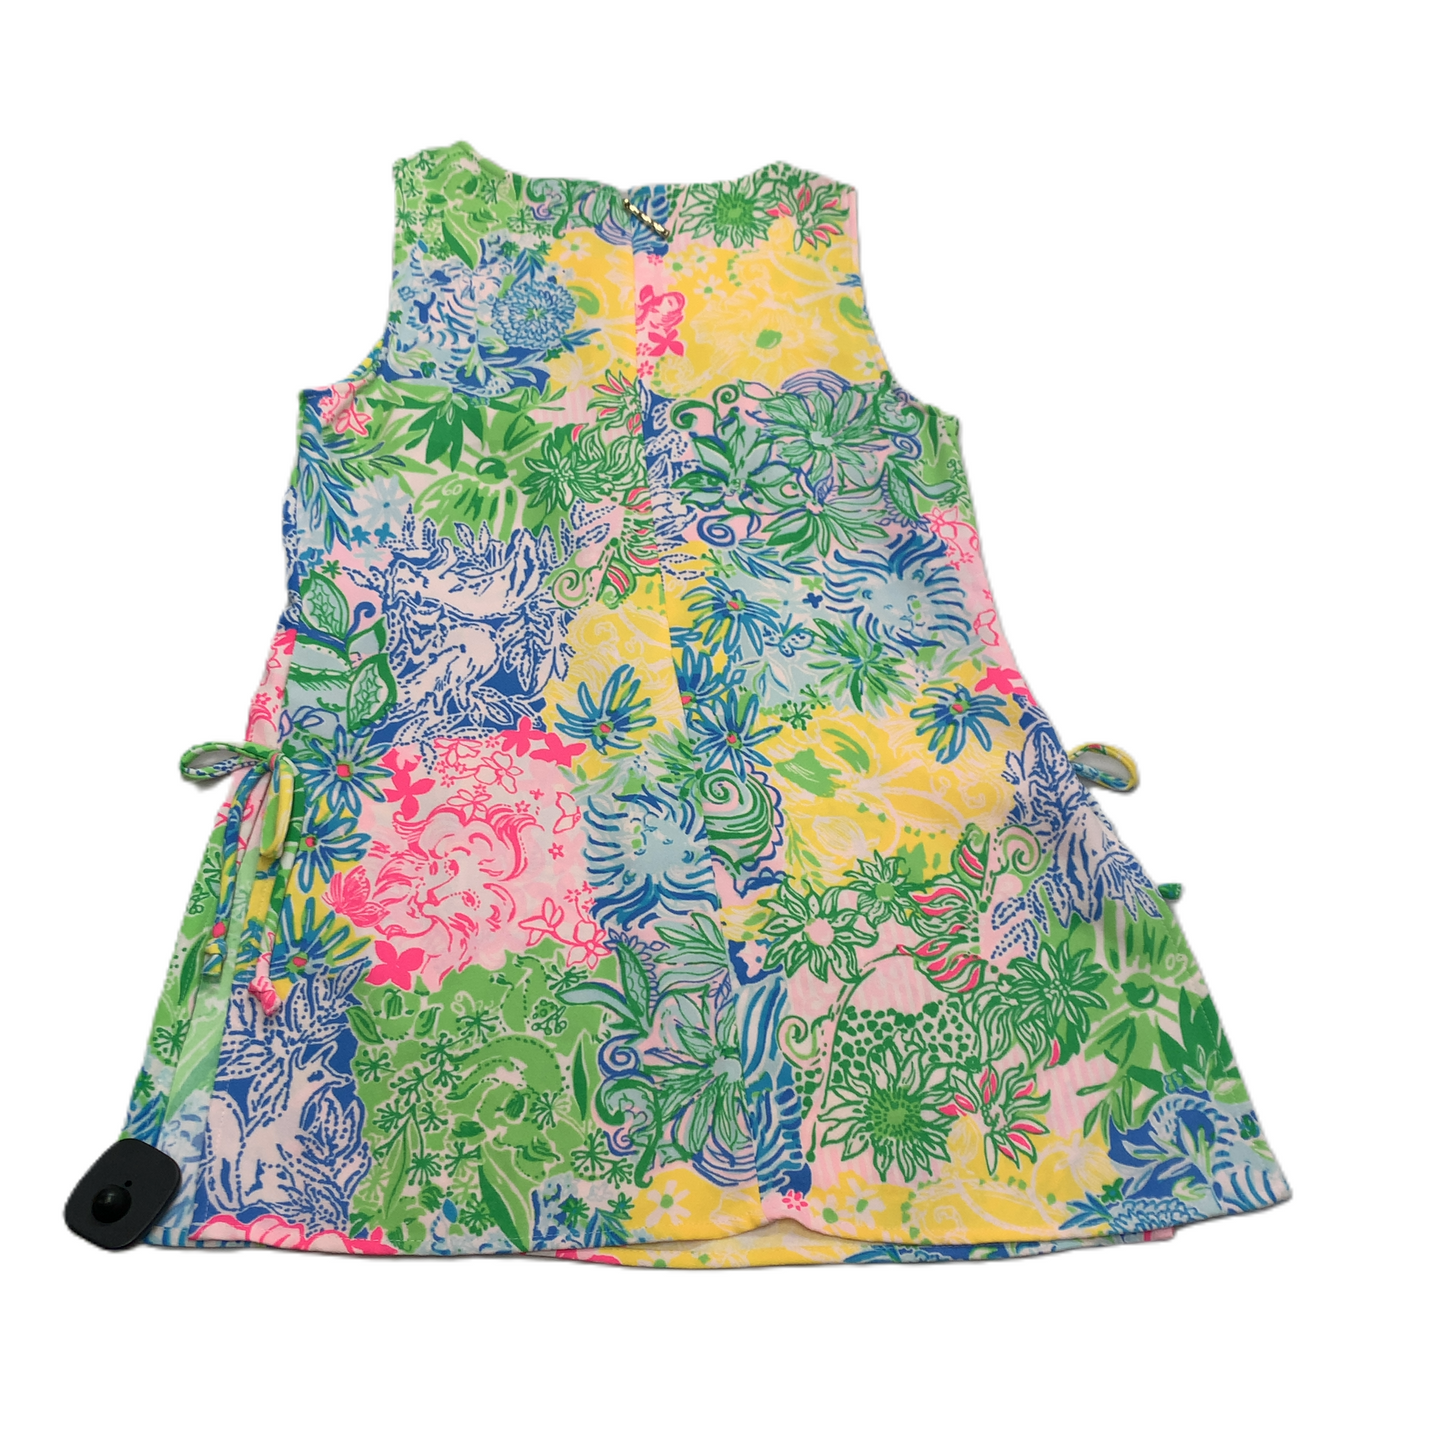 Multi-colored  Dress Designer By Lilly Pulitzer  Size: S